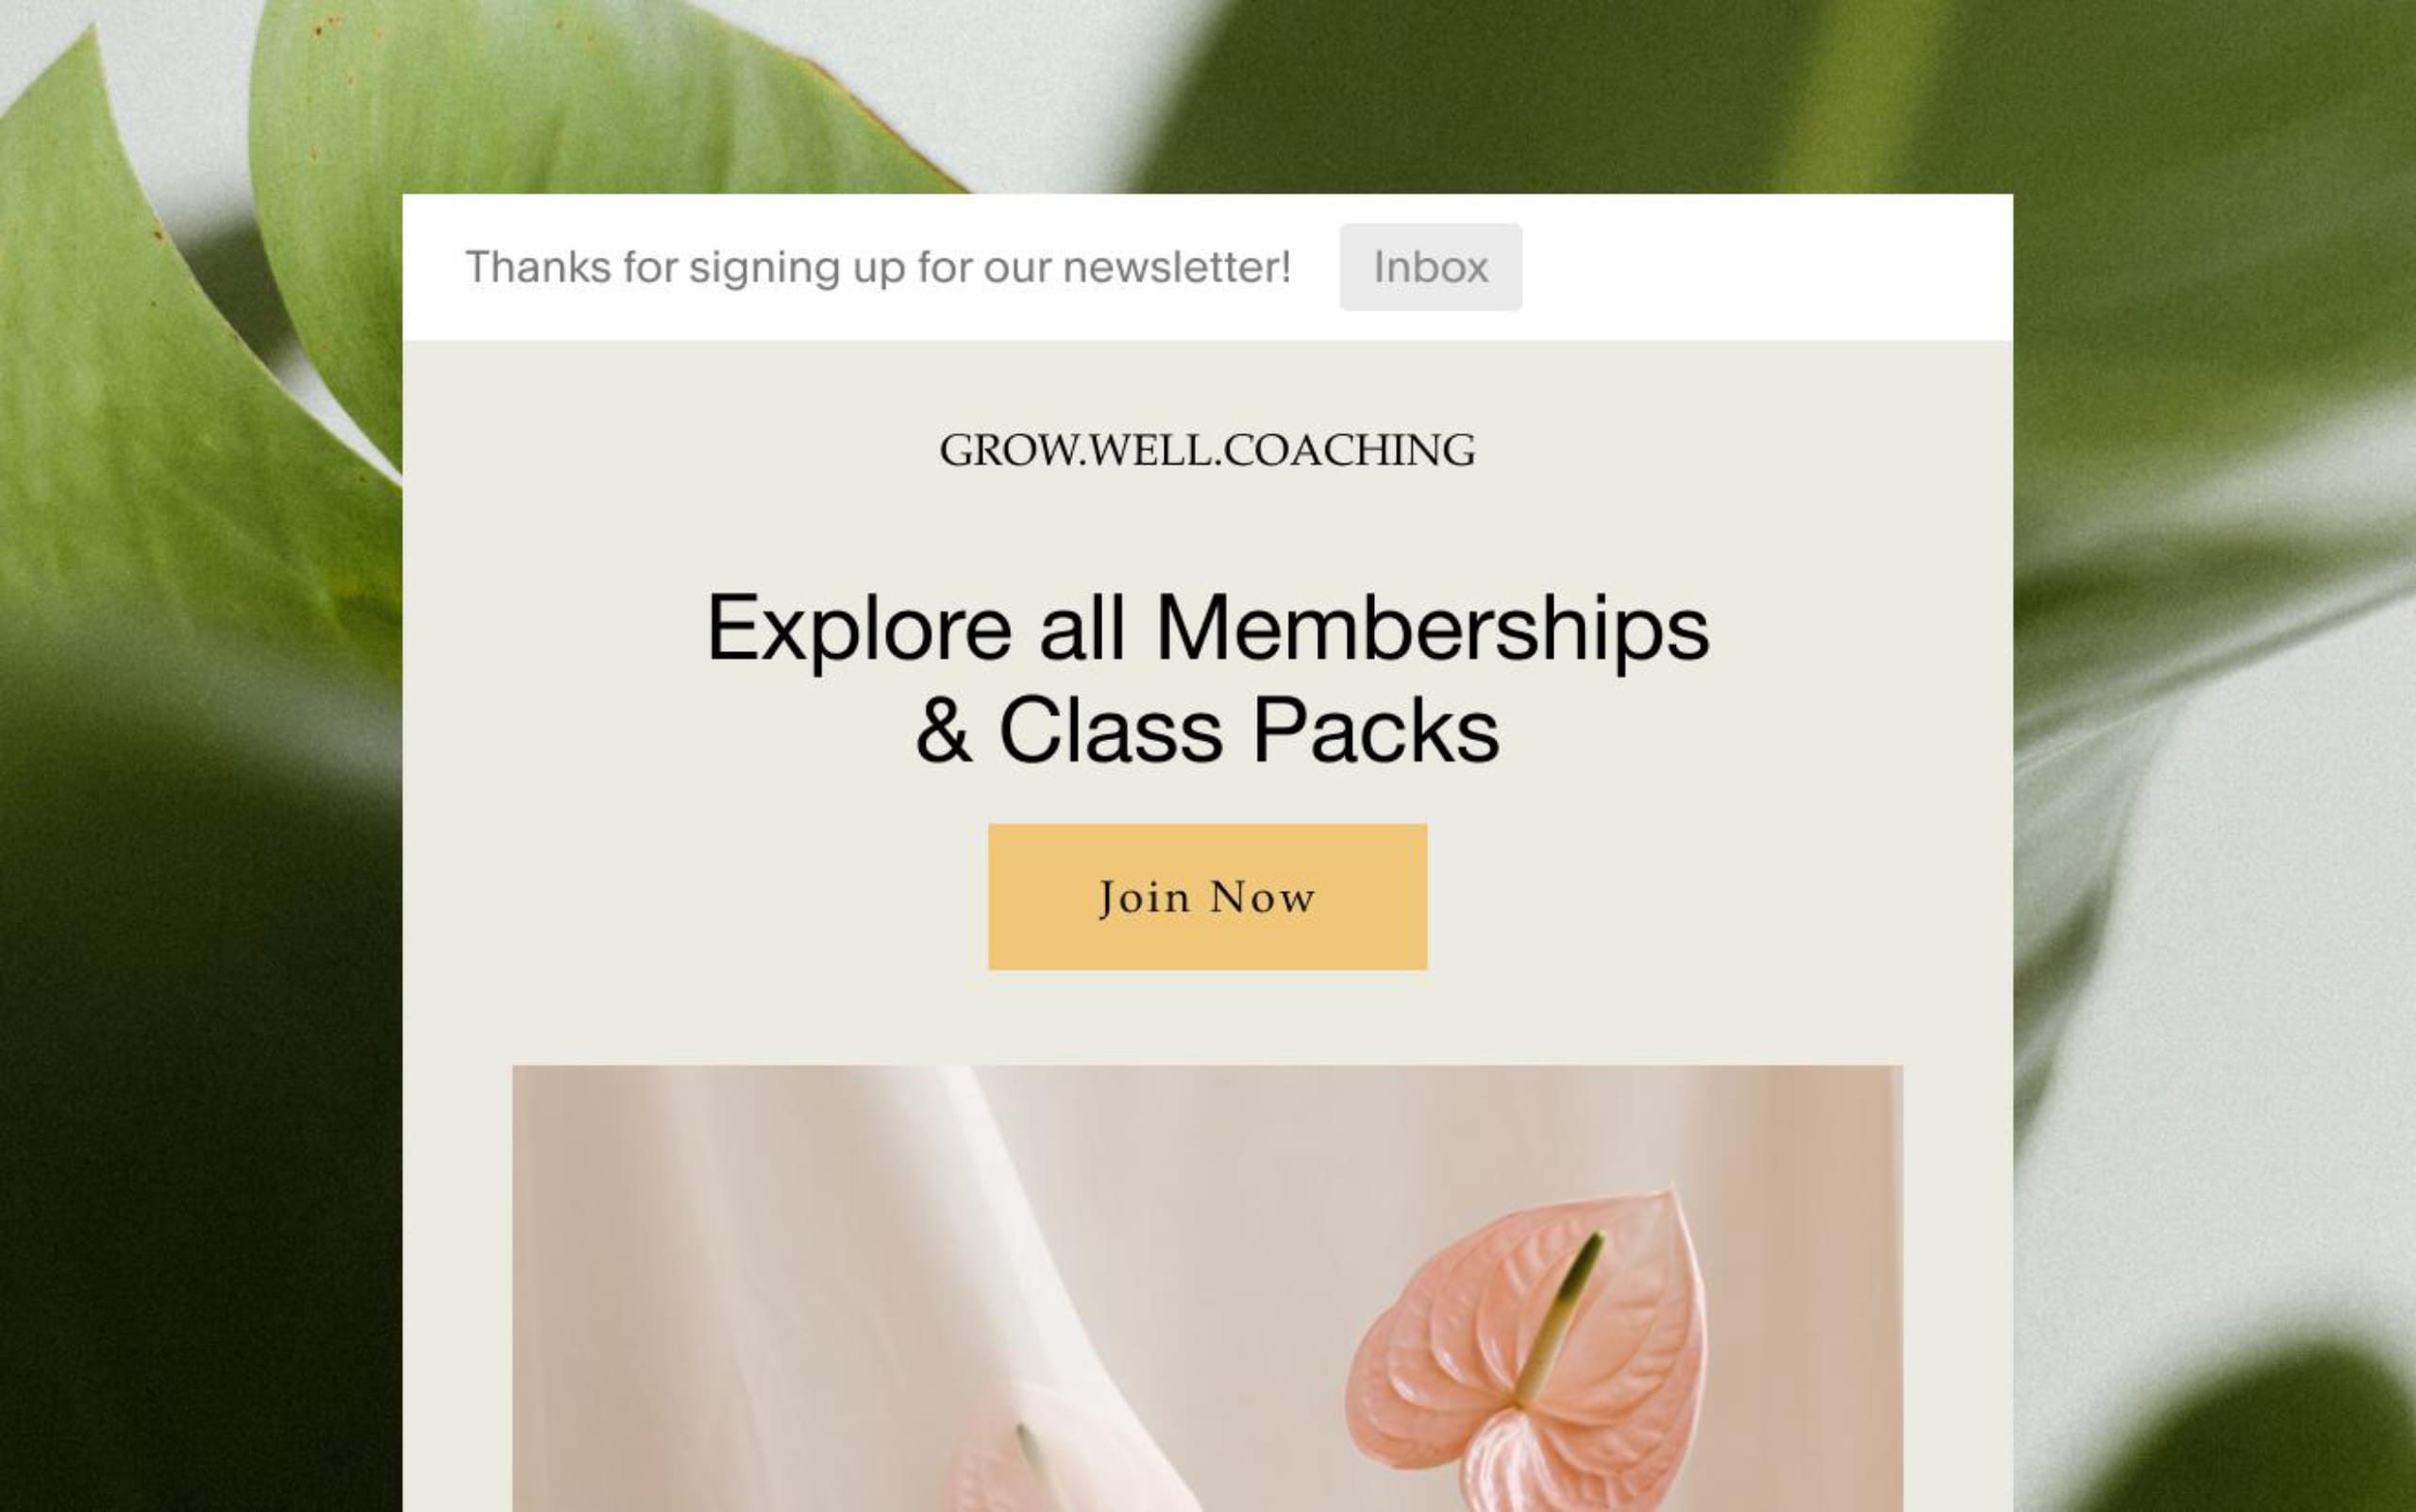 Squarespace Email Marketing